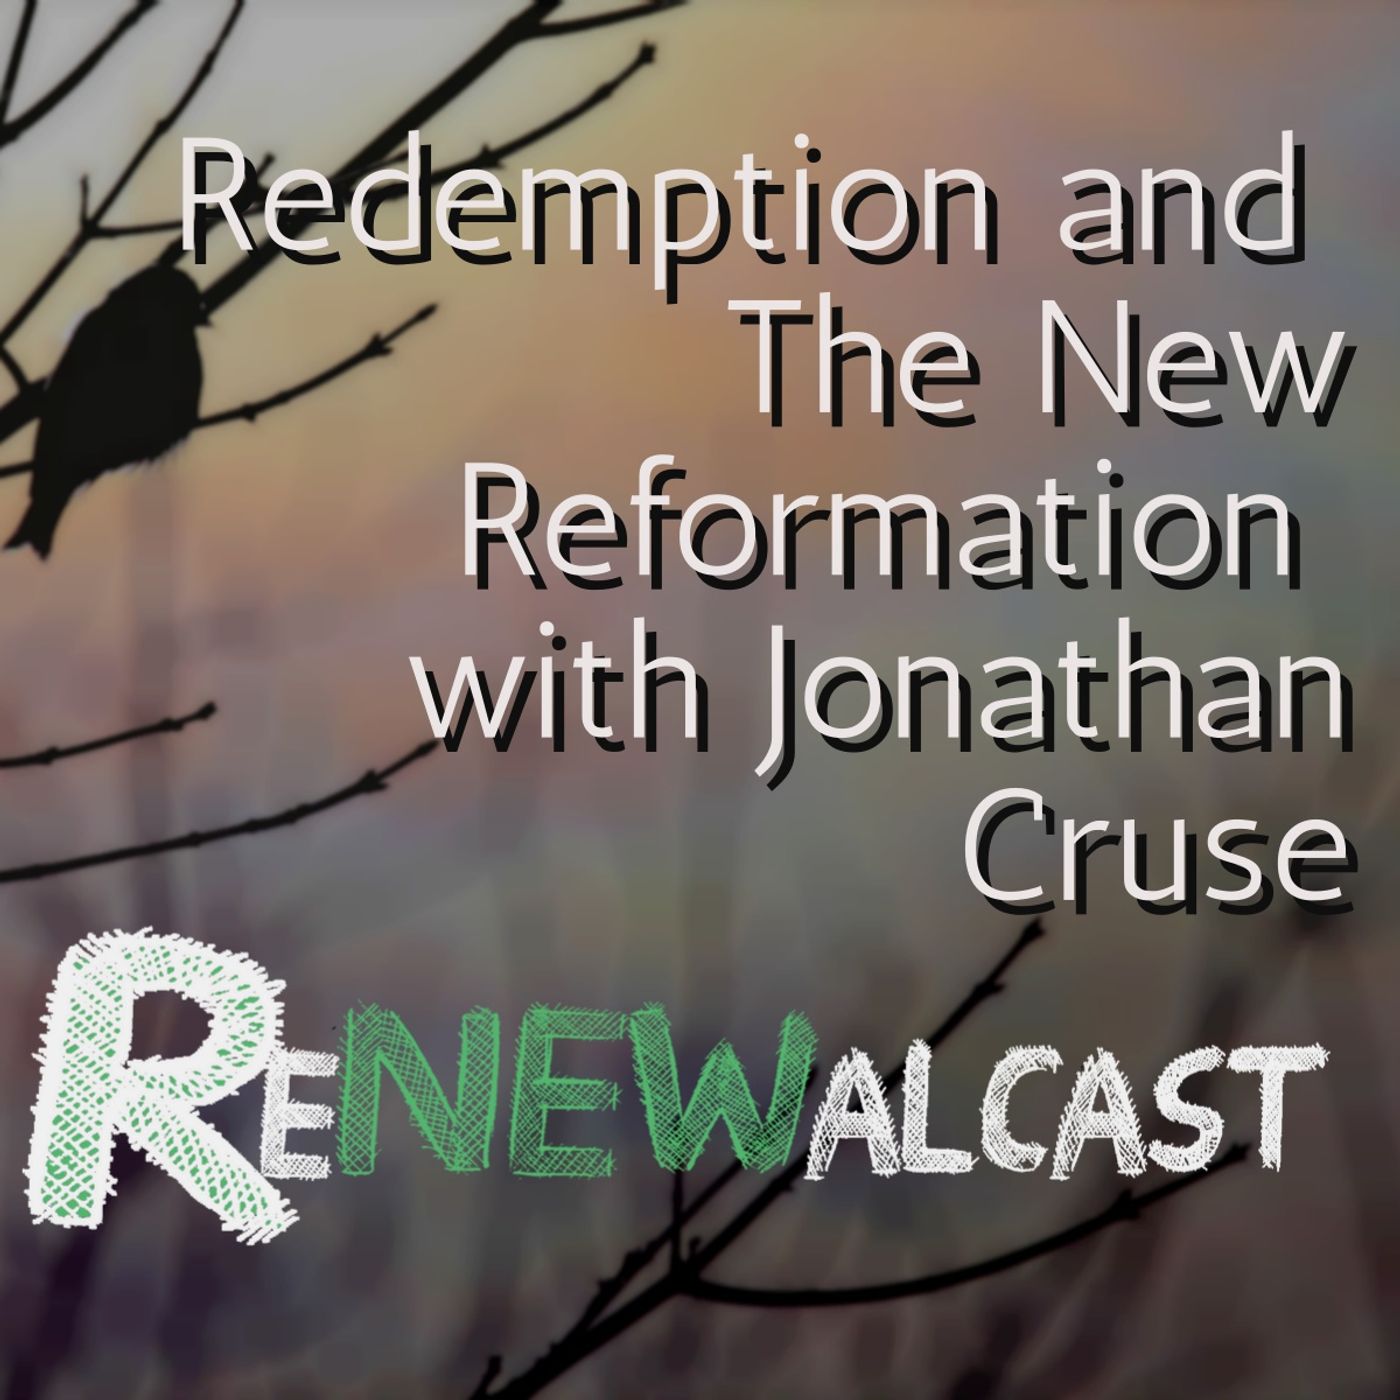 Redemption and the New Reformation with Jonathan Cruse